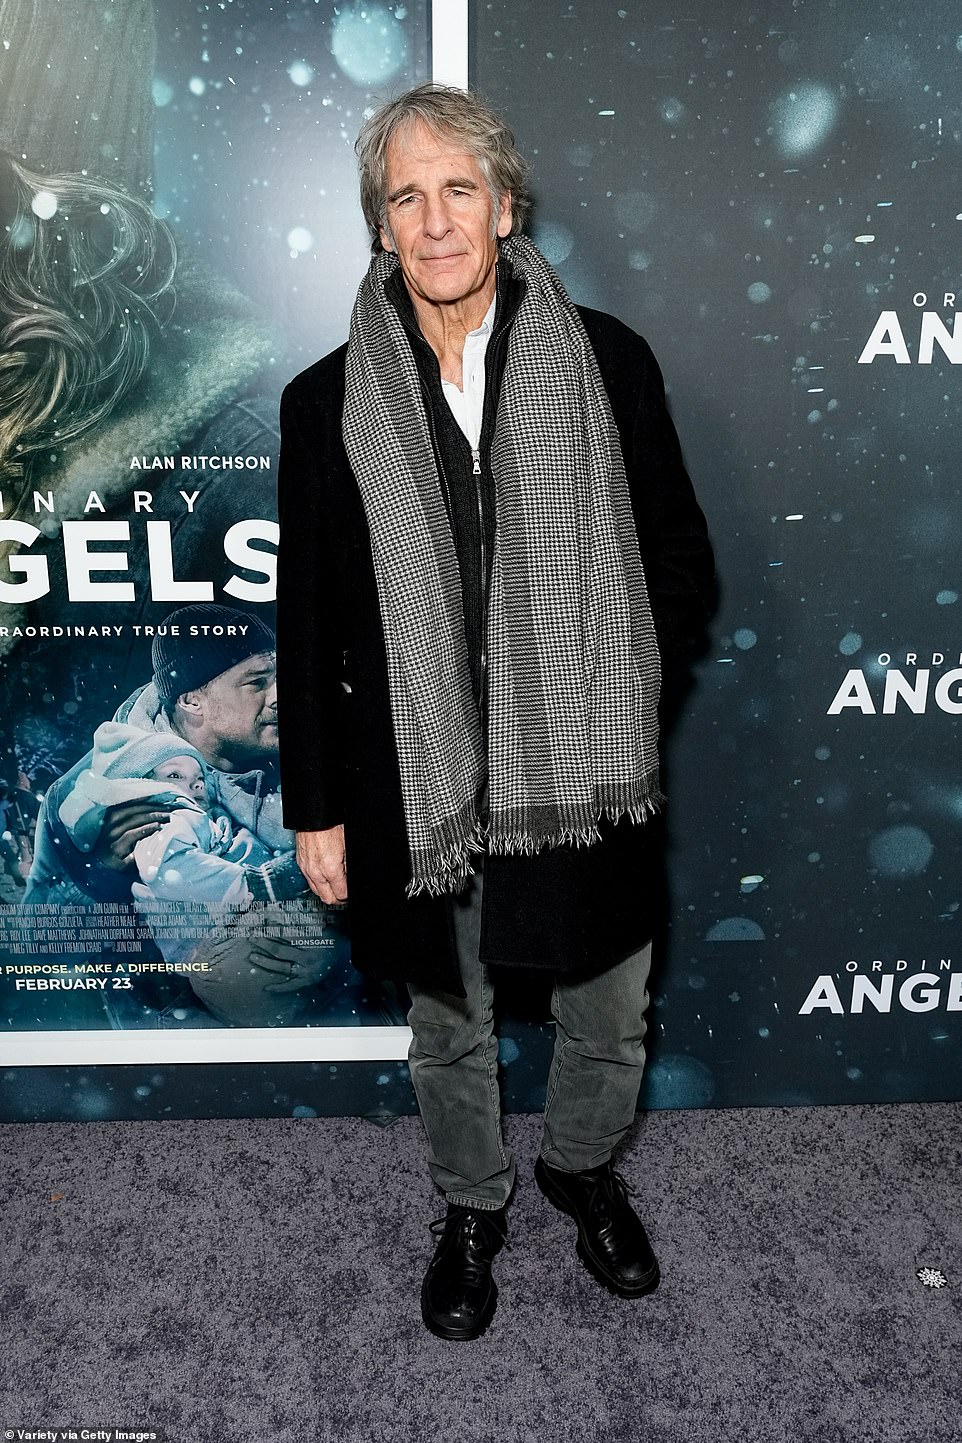 Quantum Leap's Scott Bakula has become a real silver fox.  The 69-year-old TV star made a rare appearance at the New York premiere of the film Ordinary Angels, starring Hilary Swank, on Monday.